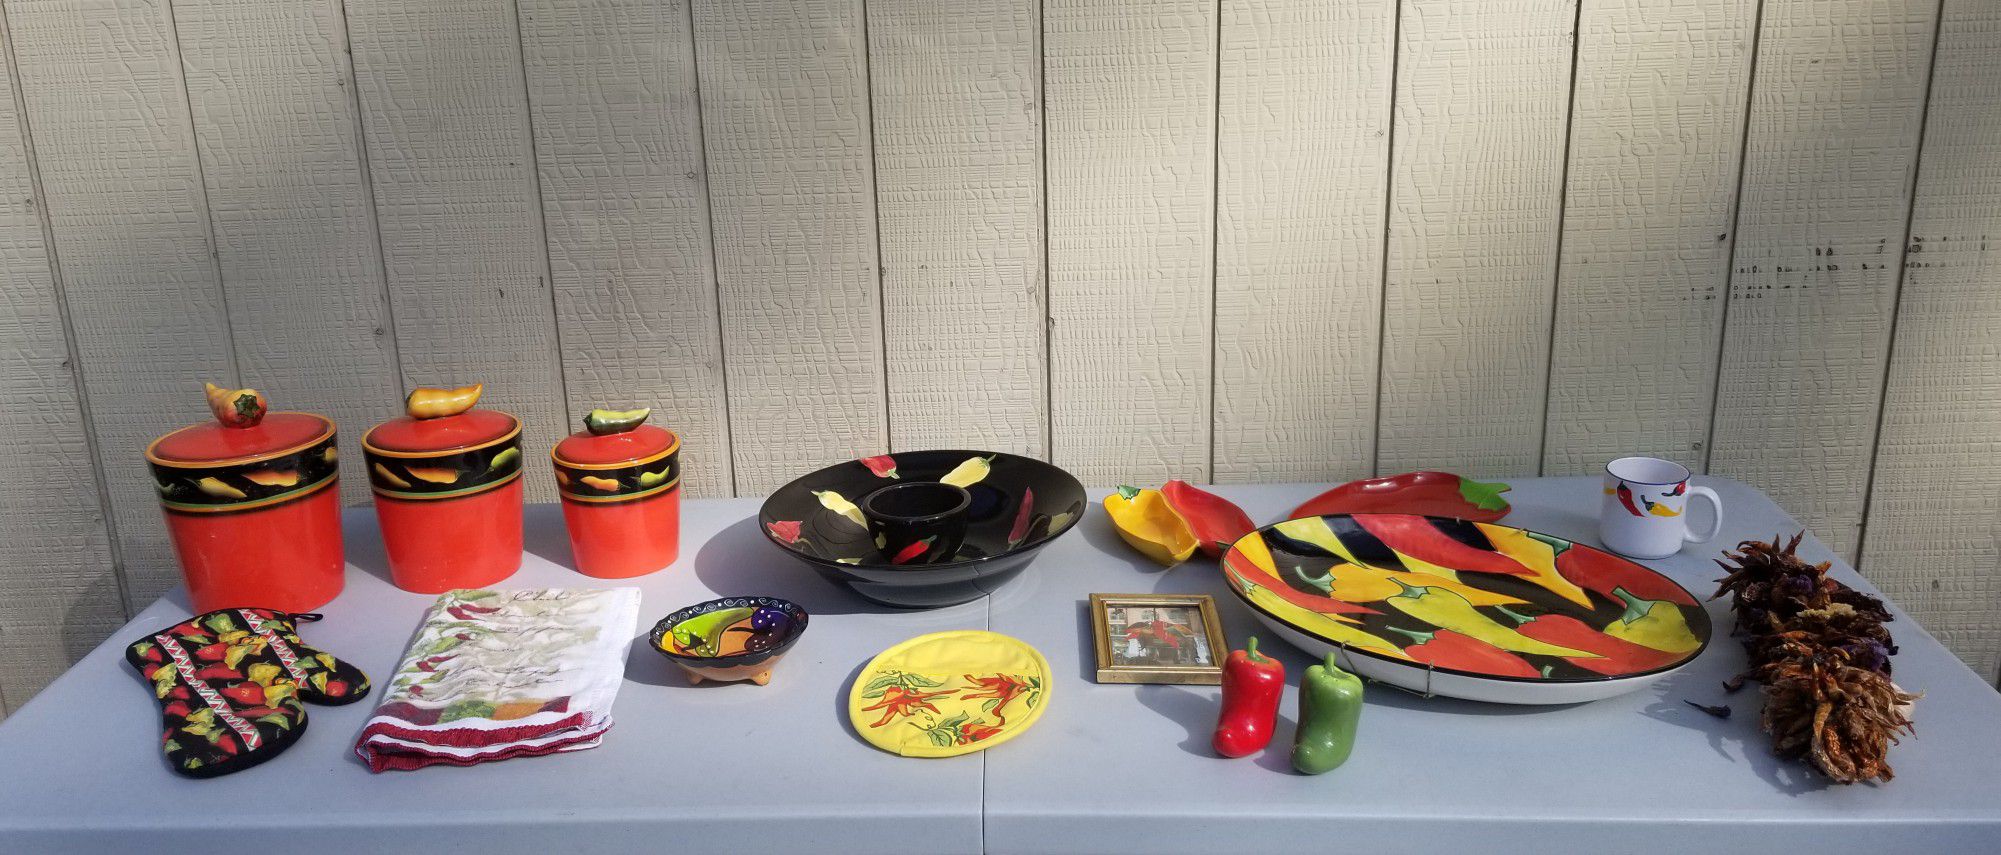 Chili Pepper kitchen collection